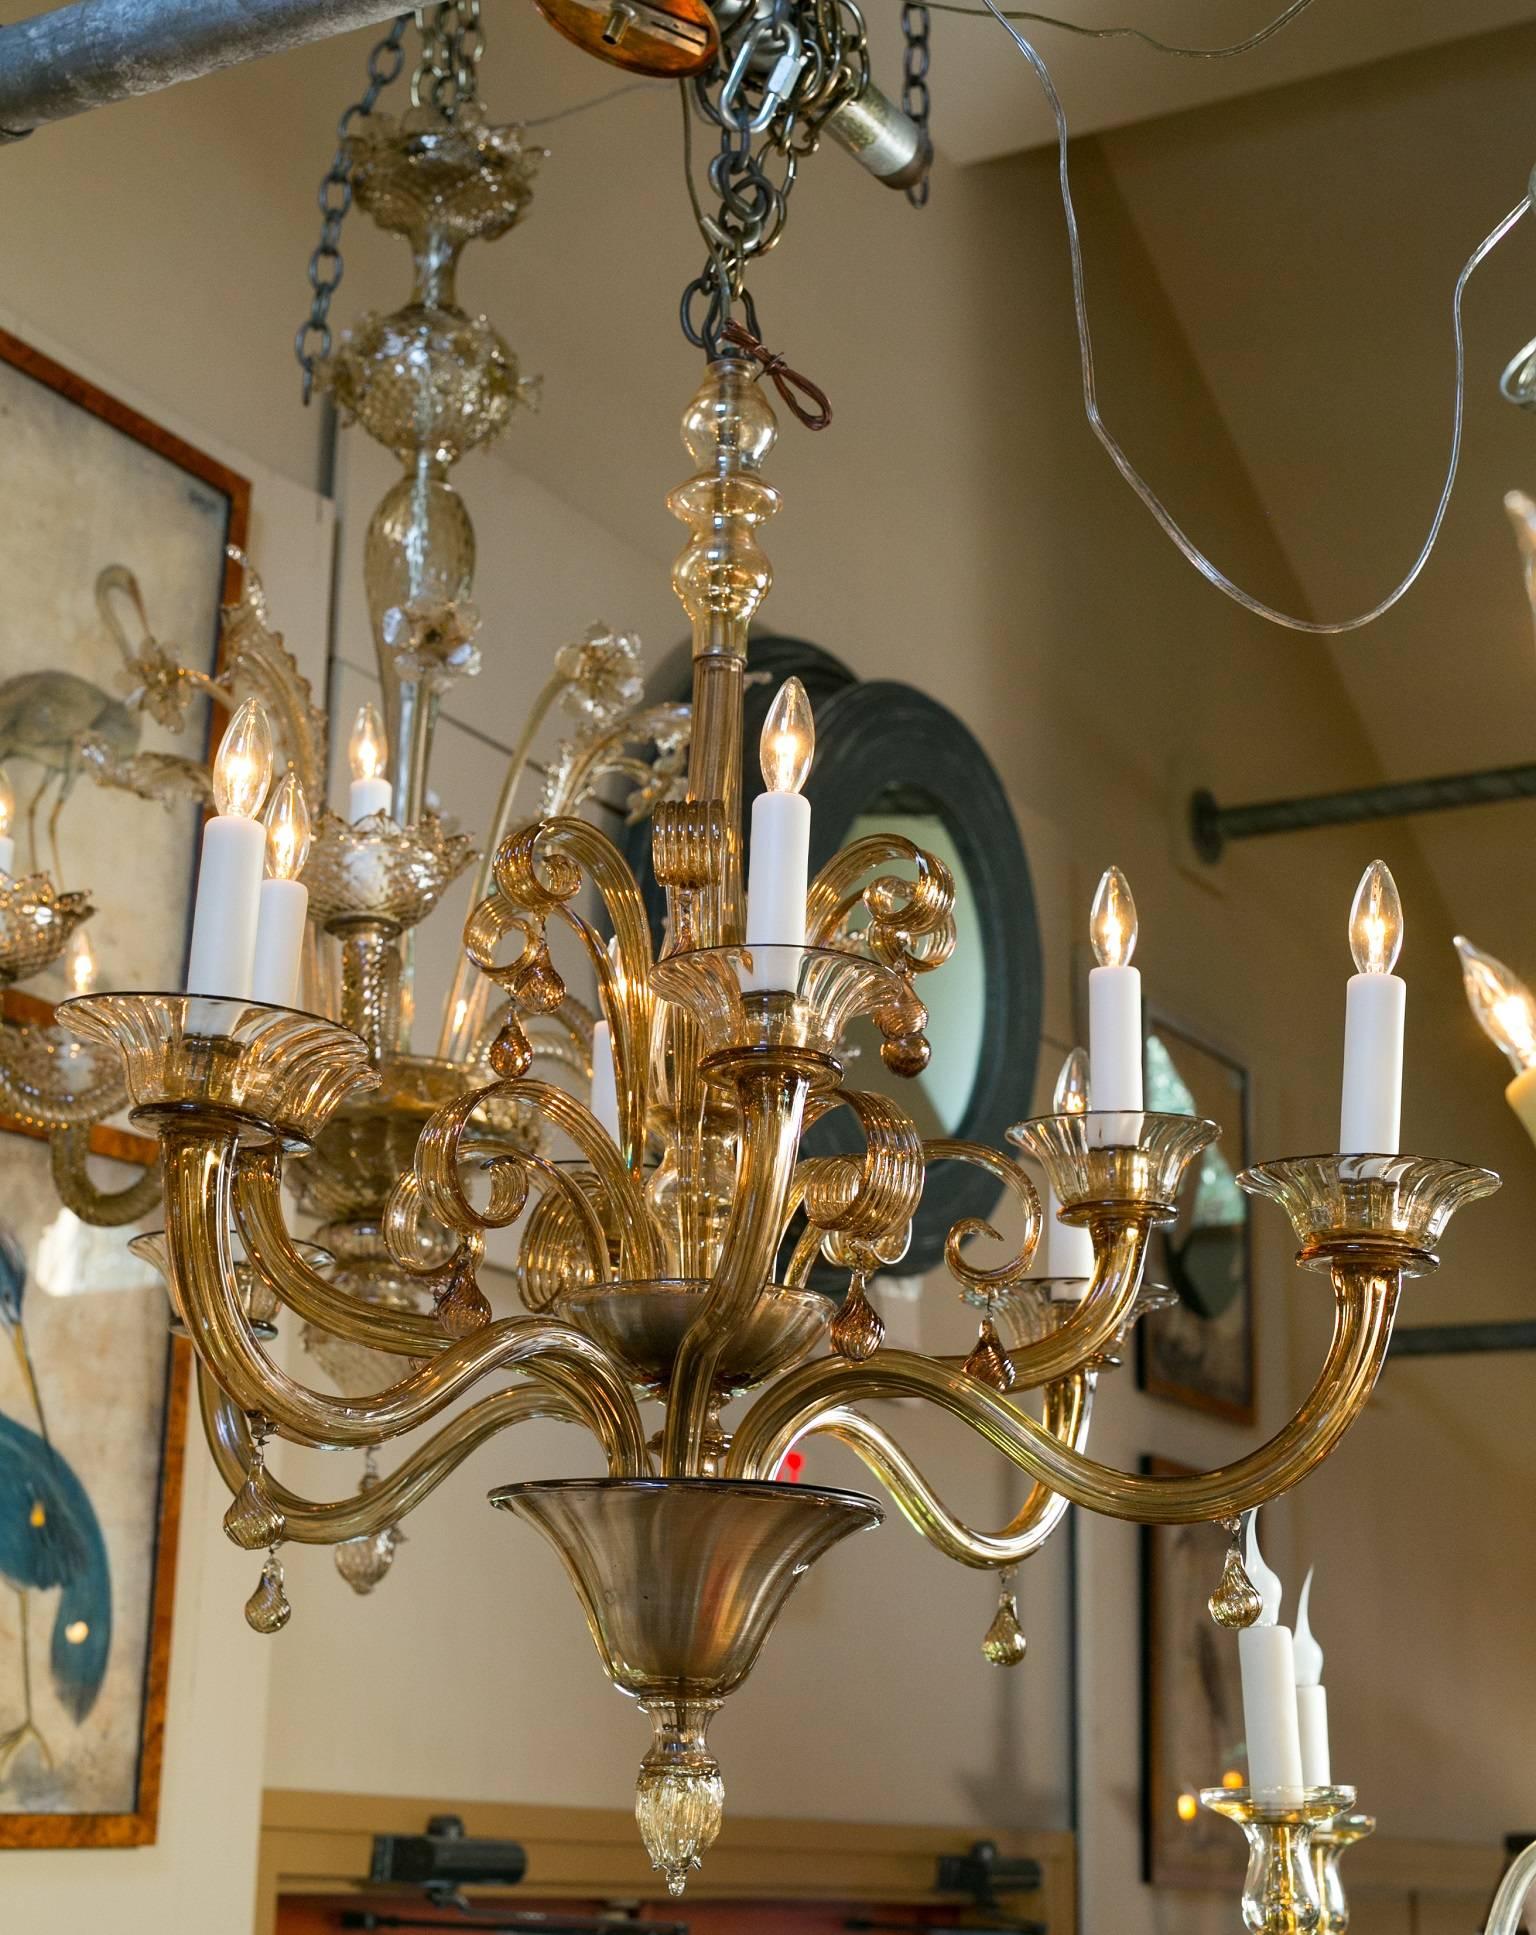 Large tea colored or amber Murano glass chandelier with glass scrolls and glass drops. Eight arms with candelabra sockets. Beautiful proportion and repetition. All original parts. Newly wired in the USA with all UL approved parts. Comes with chain